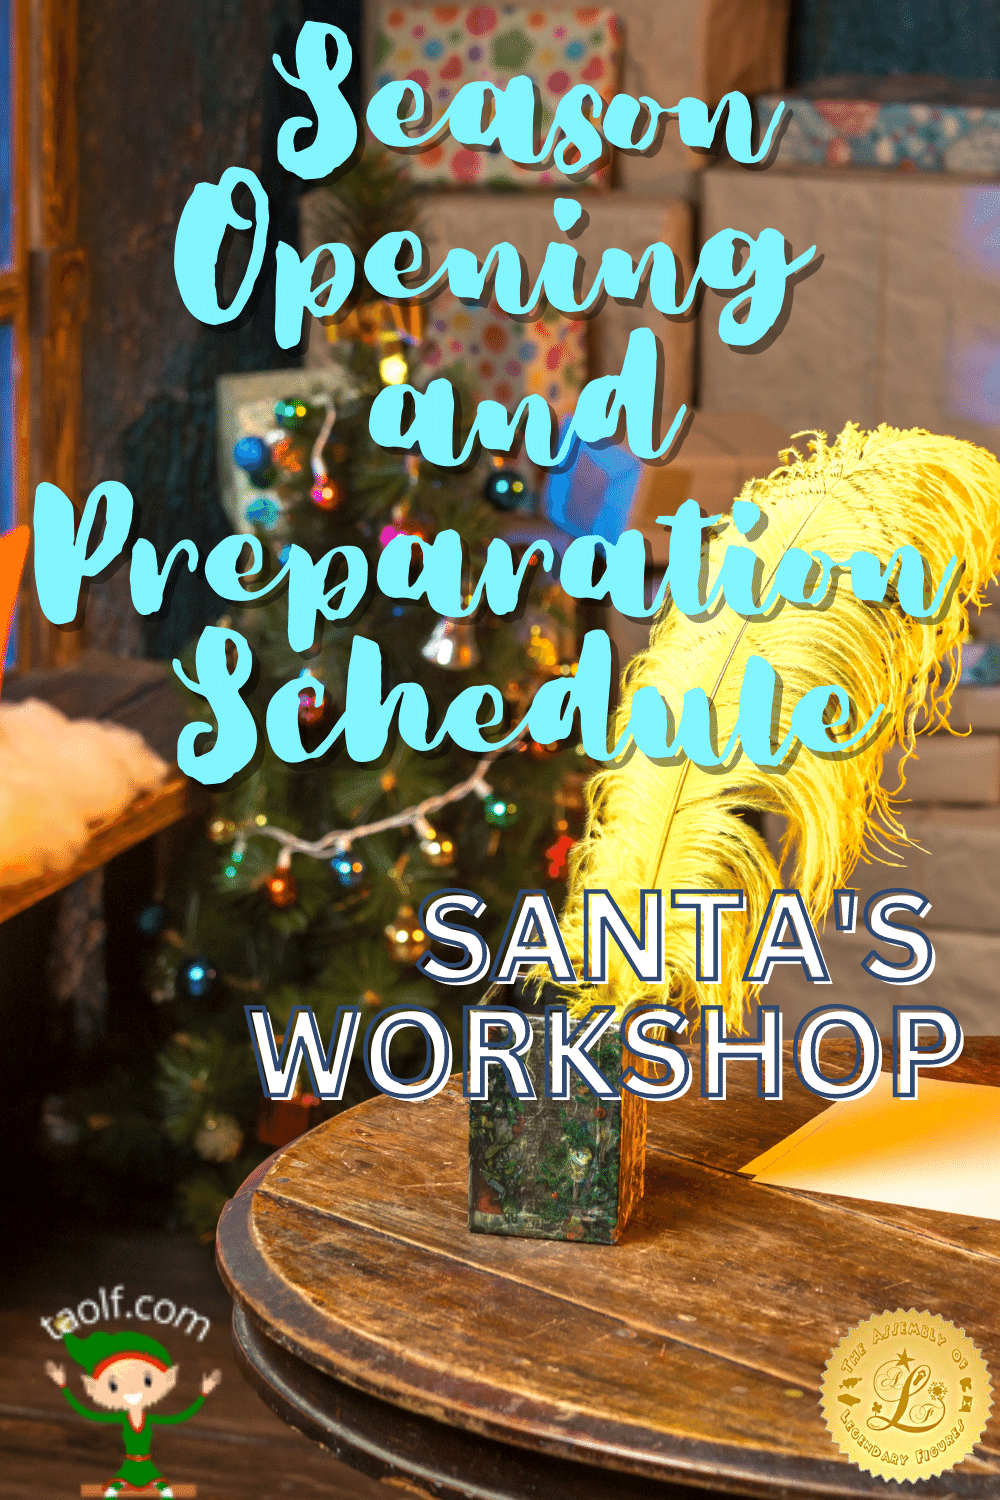 Season Opening Cleaning and Preparation Schedule